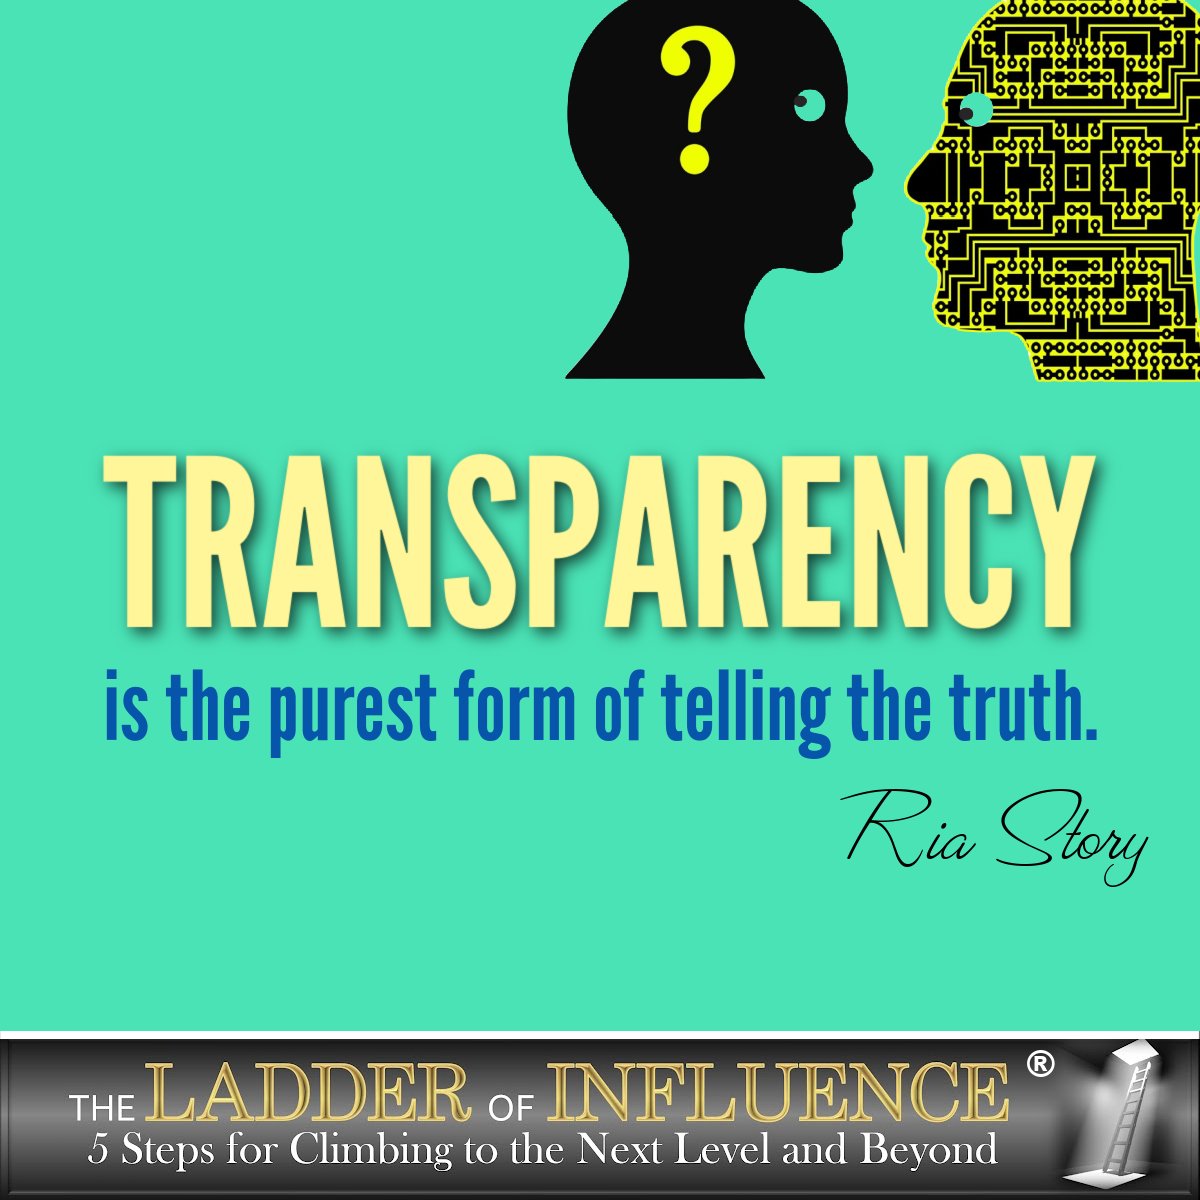 Transparency increases your influence because it builds trust!

#keepclimbing #theladderofinfluence #betransparent #trust #relationships